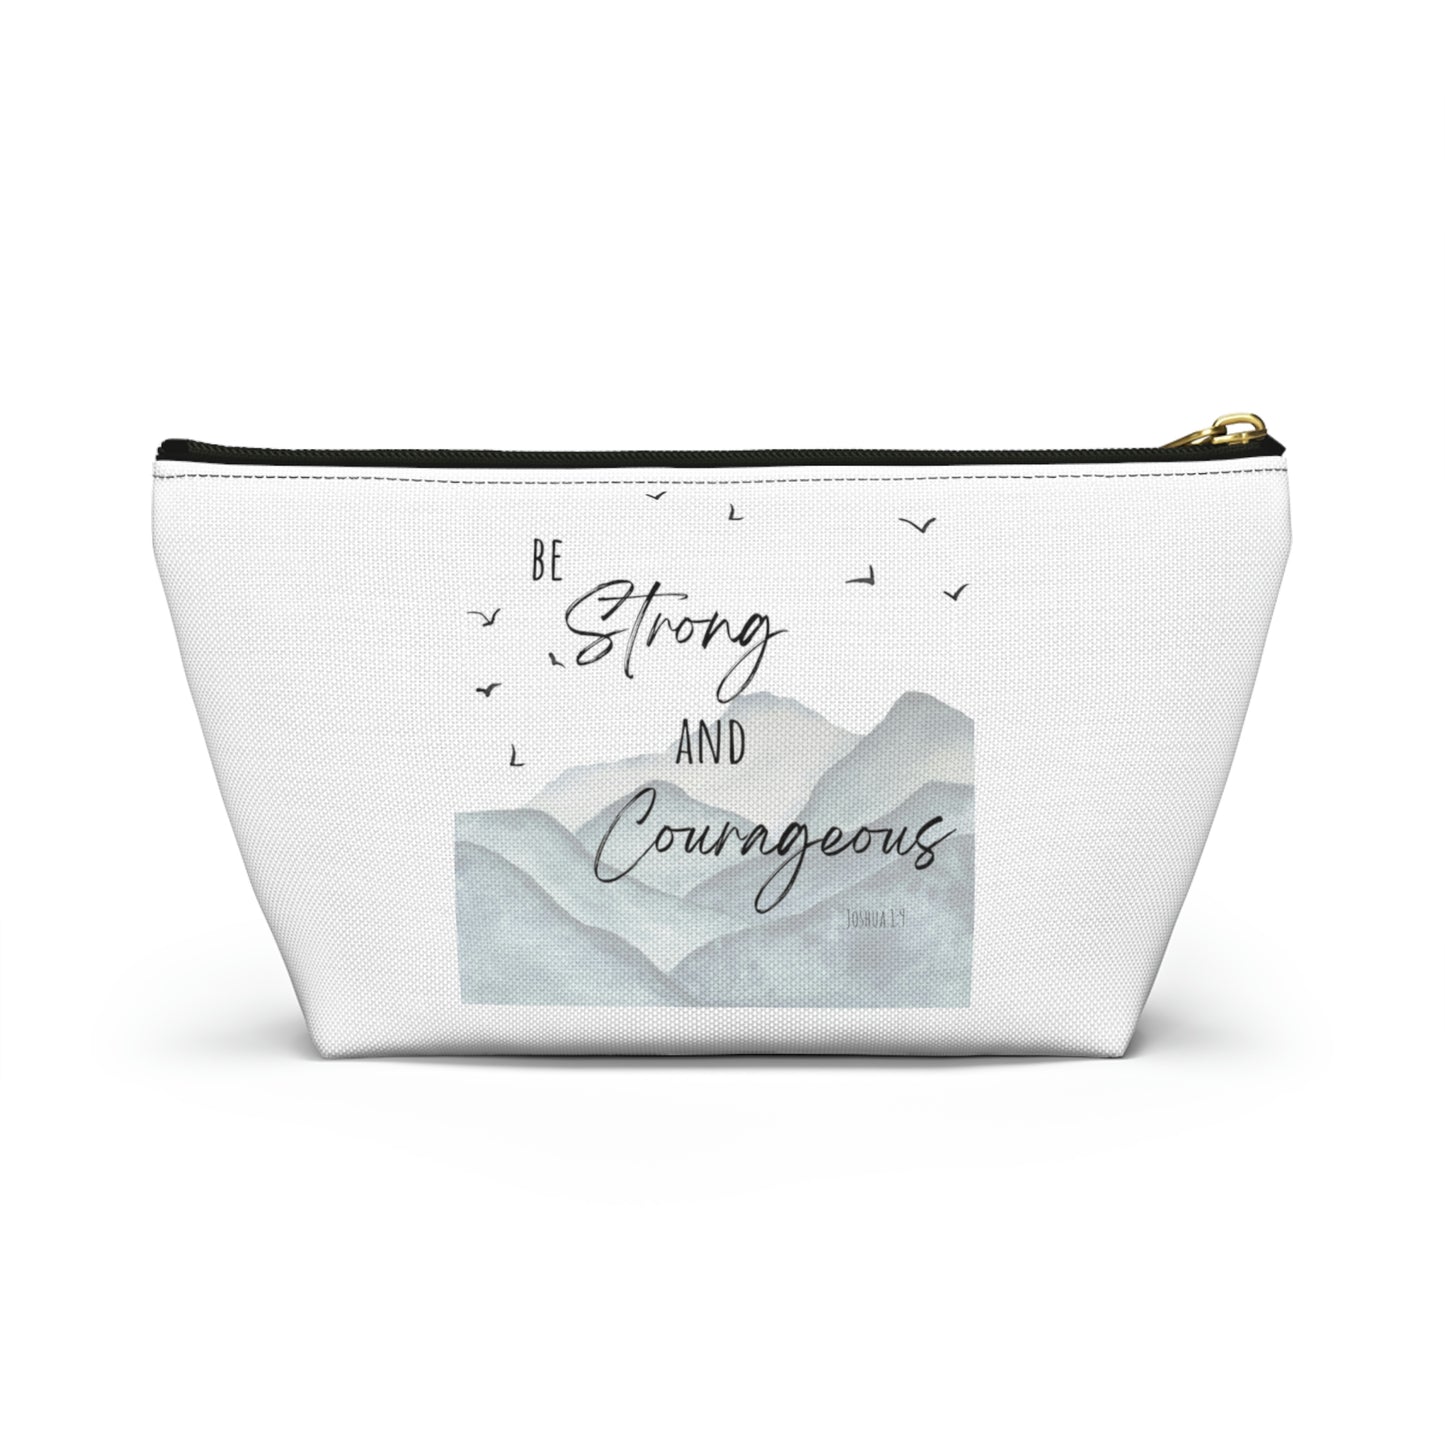 Be strong and courages bag